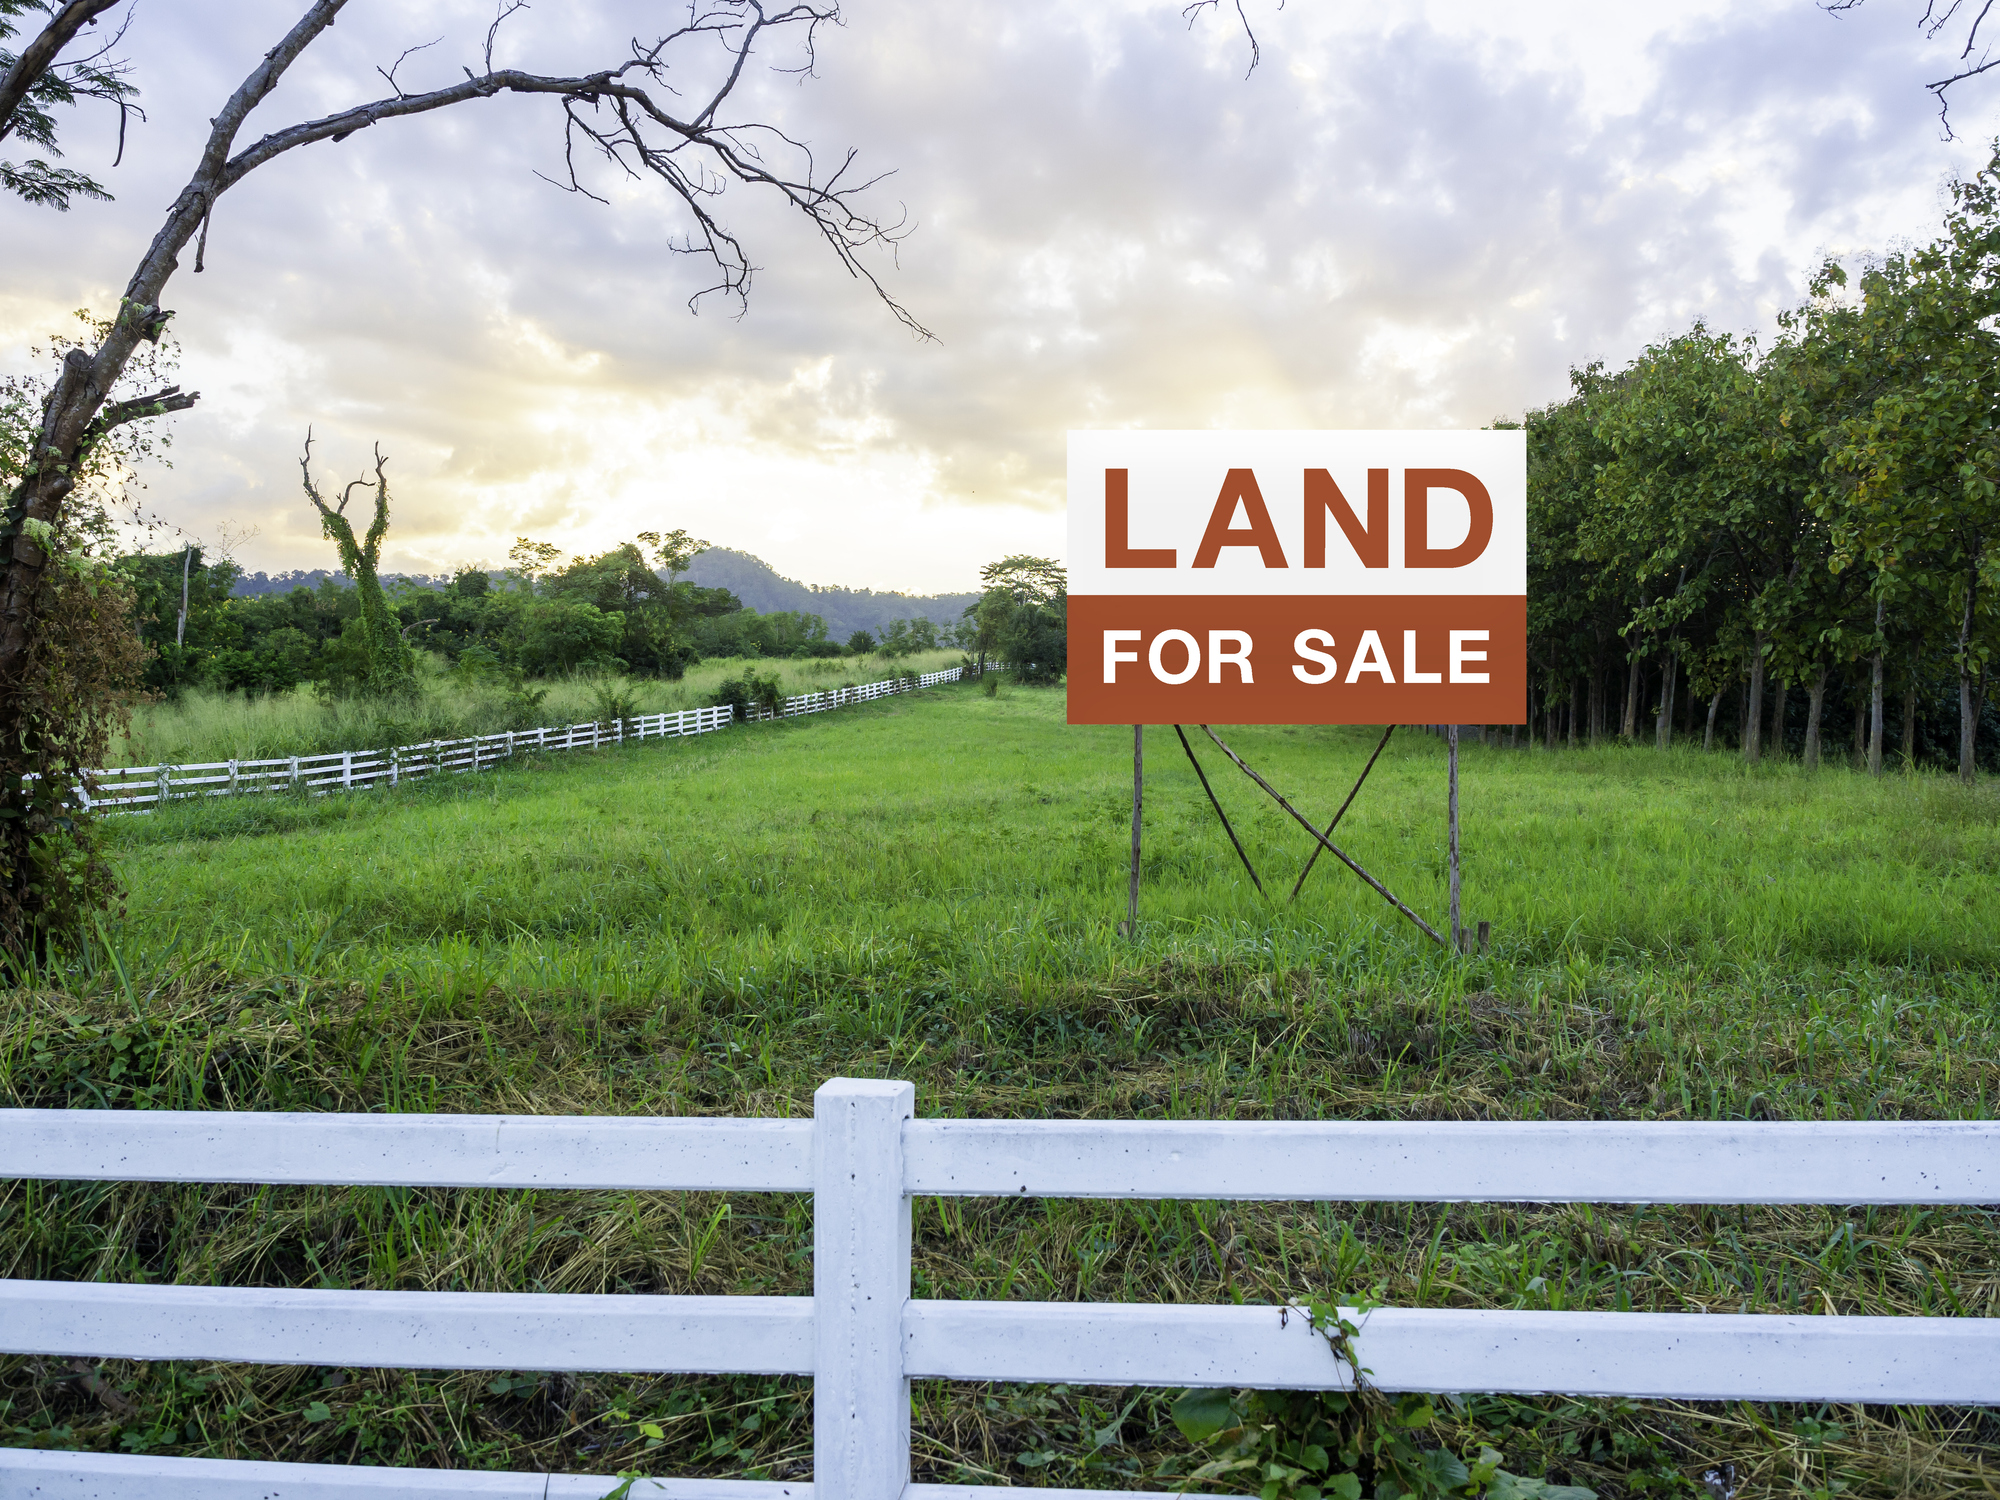 Land for sale sign on empty land. mccracken law